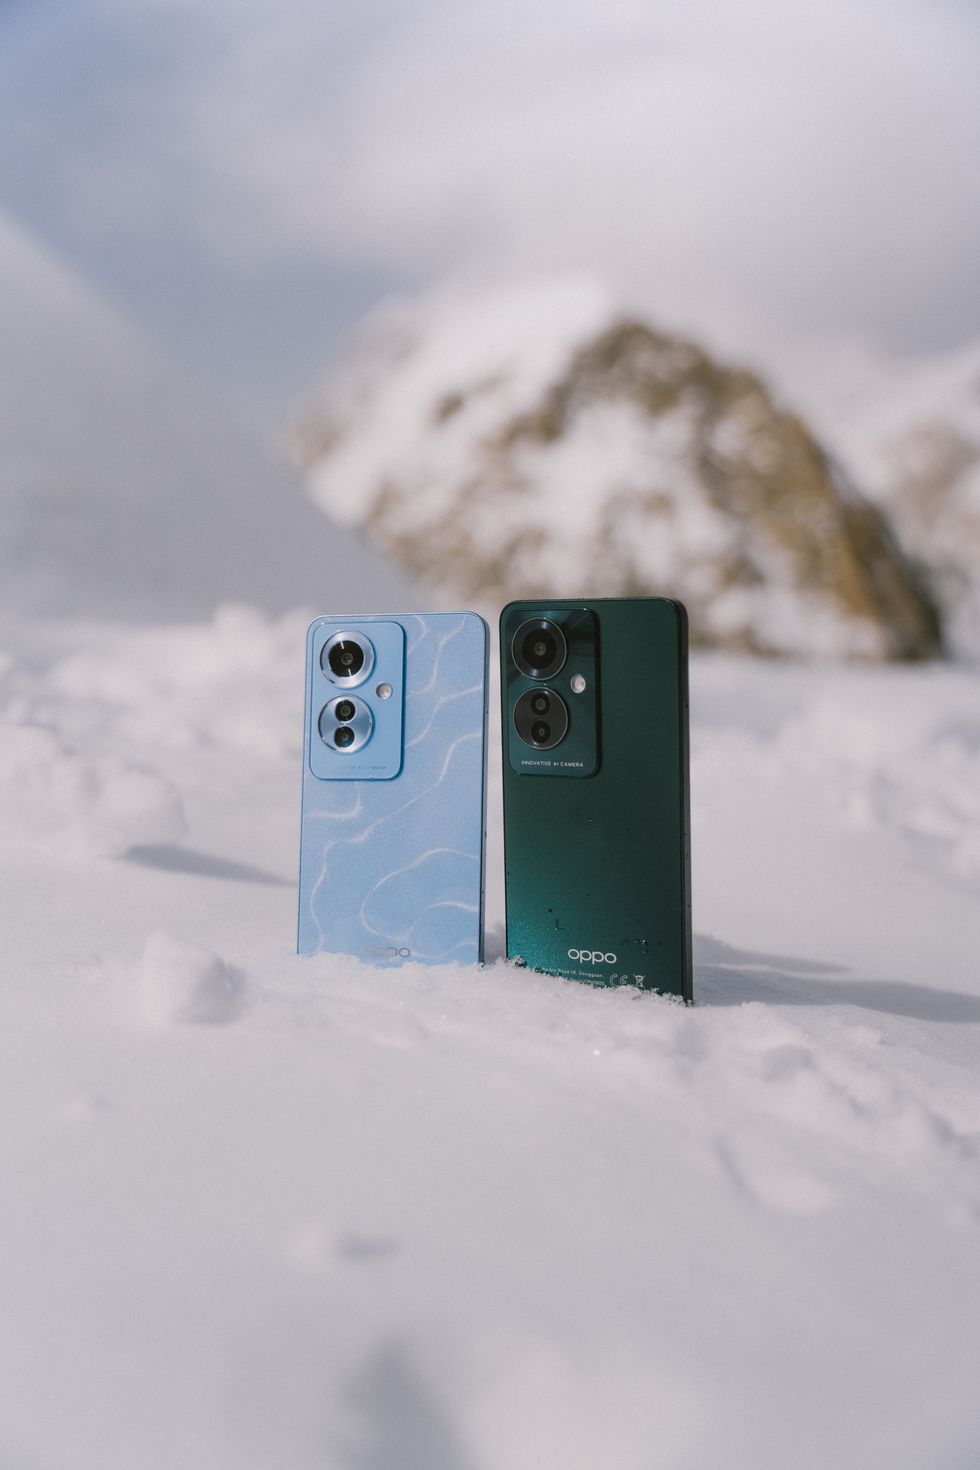 a couple of blue rectangular objects in the snow